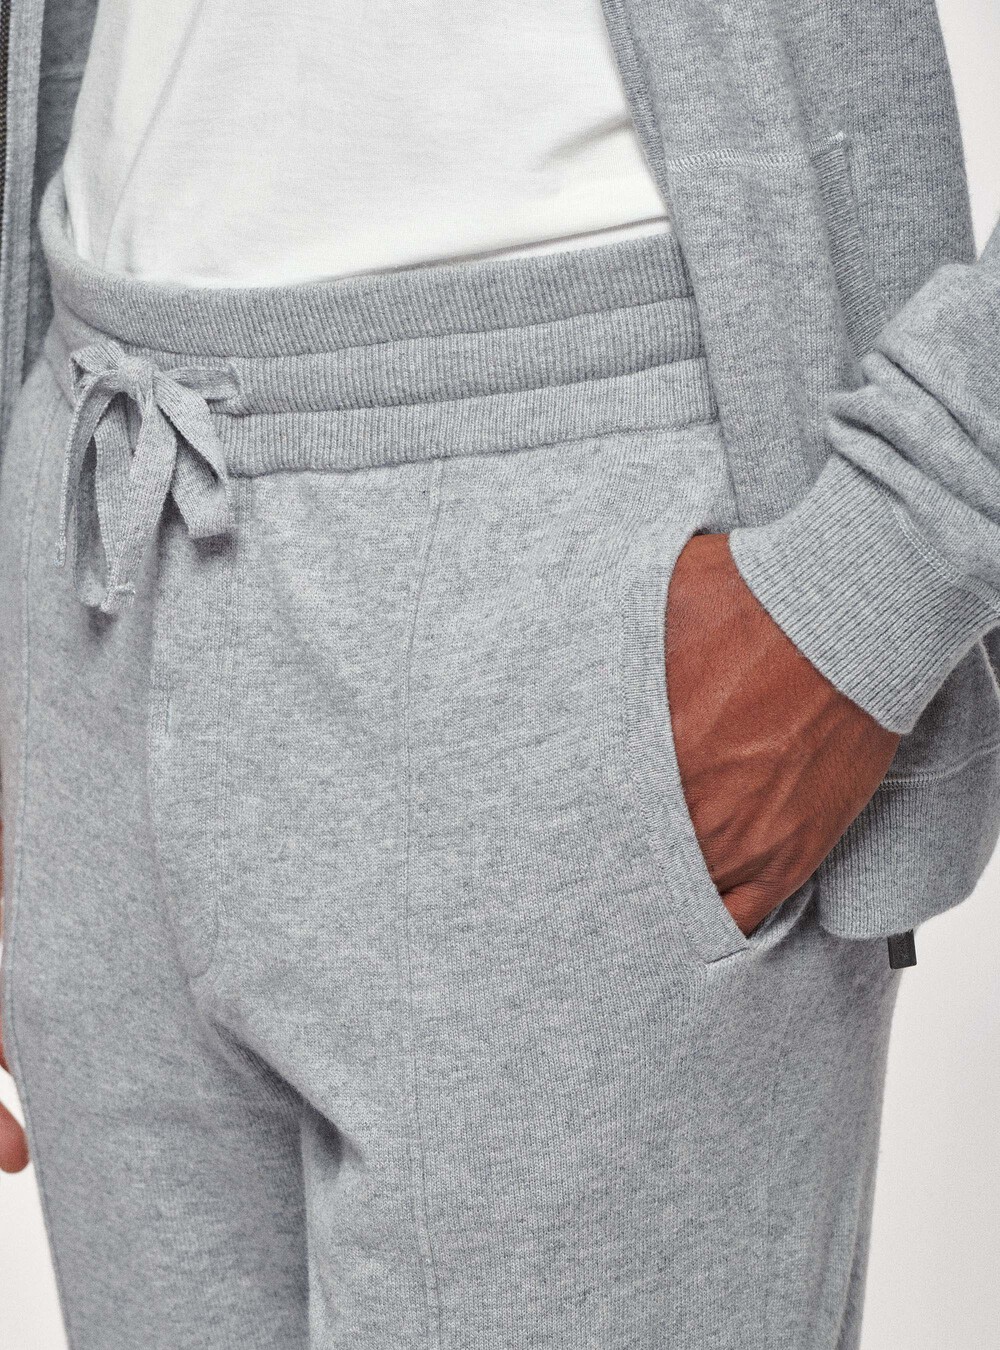 Lambswool and cashmere joggers, GutteridgeUS